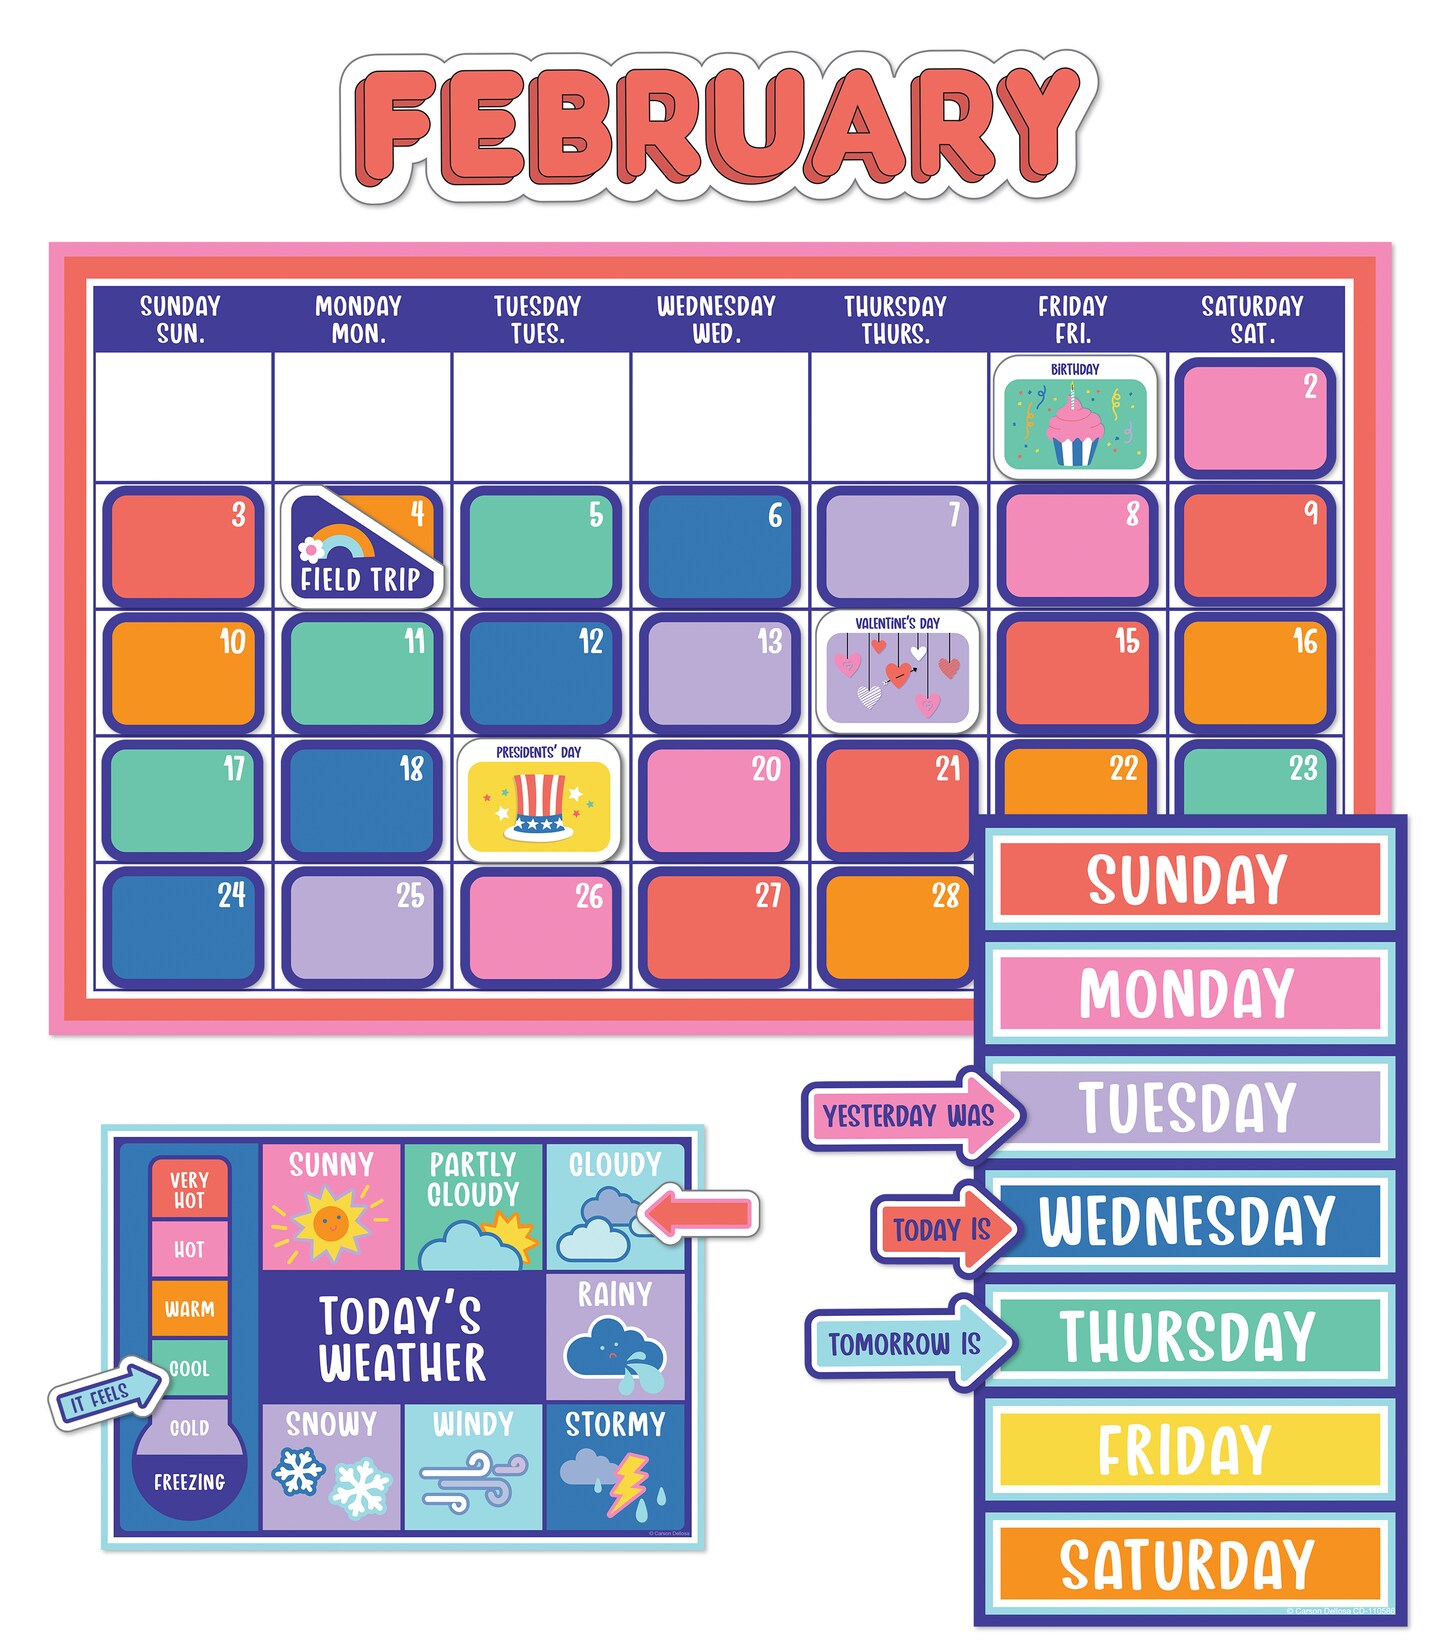 Carson Dellosa We Stick Together 163-Piece Monthly Calendar Bulletin Board Set, Classroom Calendar, Monthly Headers, Cover Ups, Days of the Week Chart, Seasonal Cutouts and More